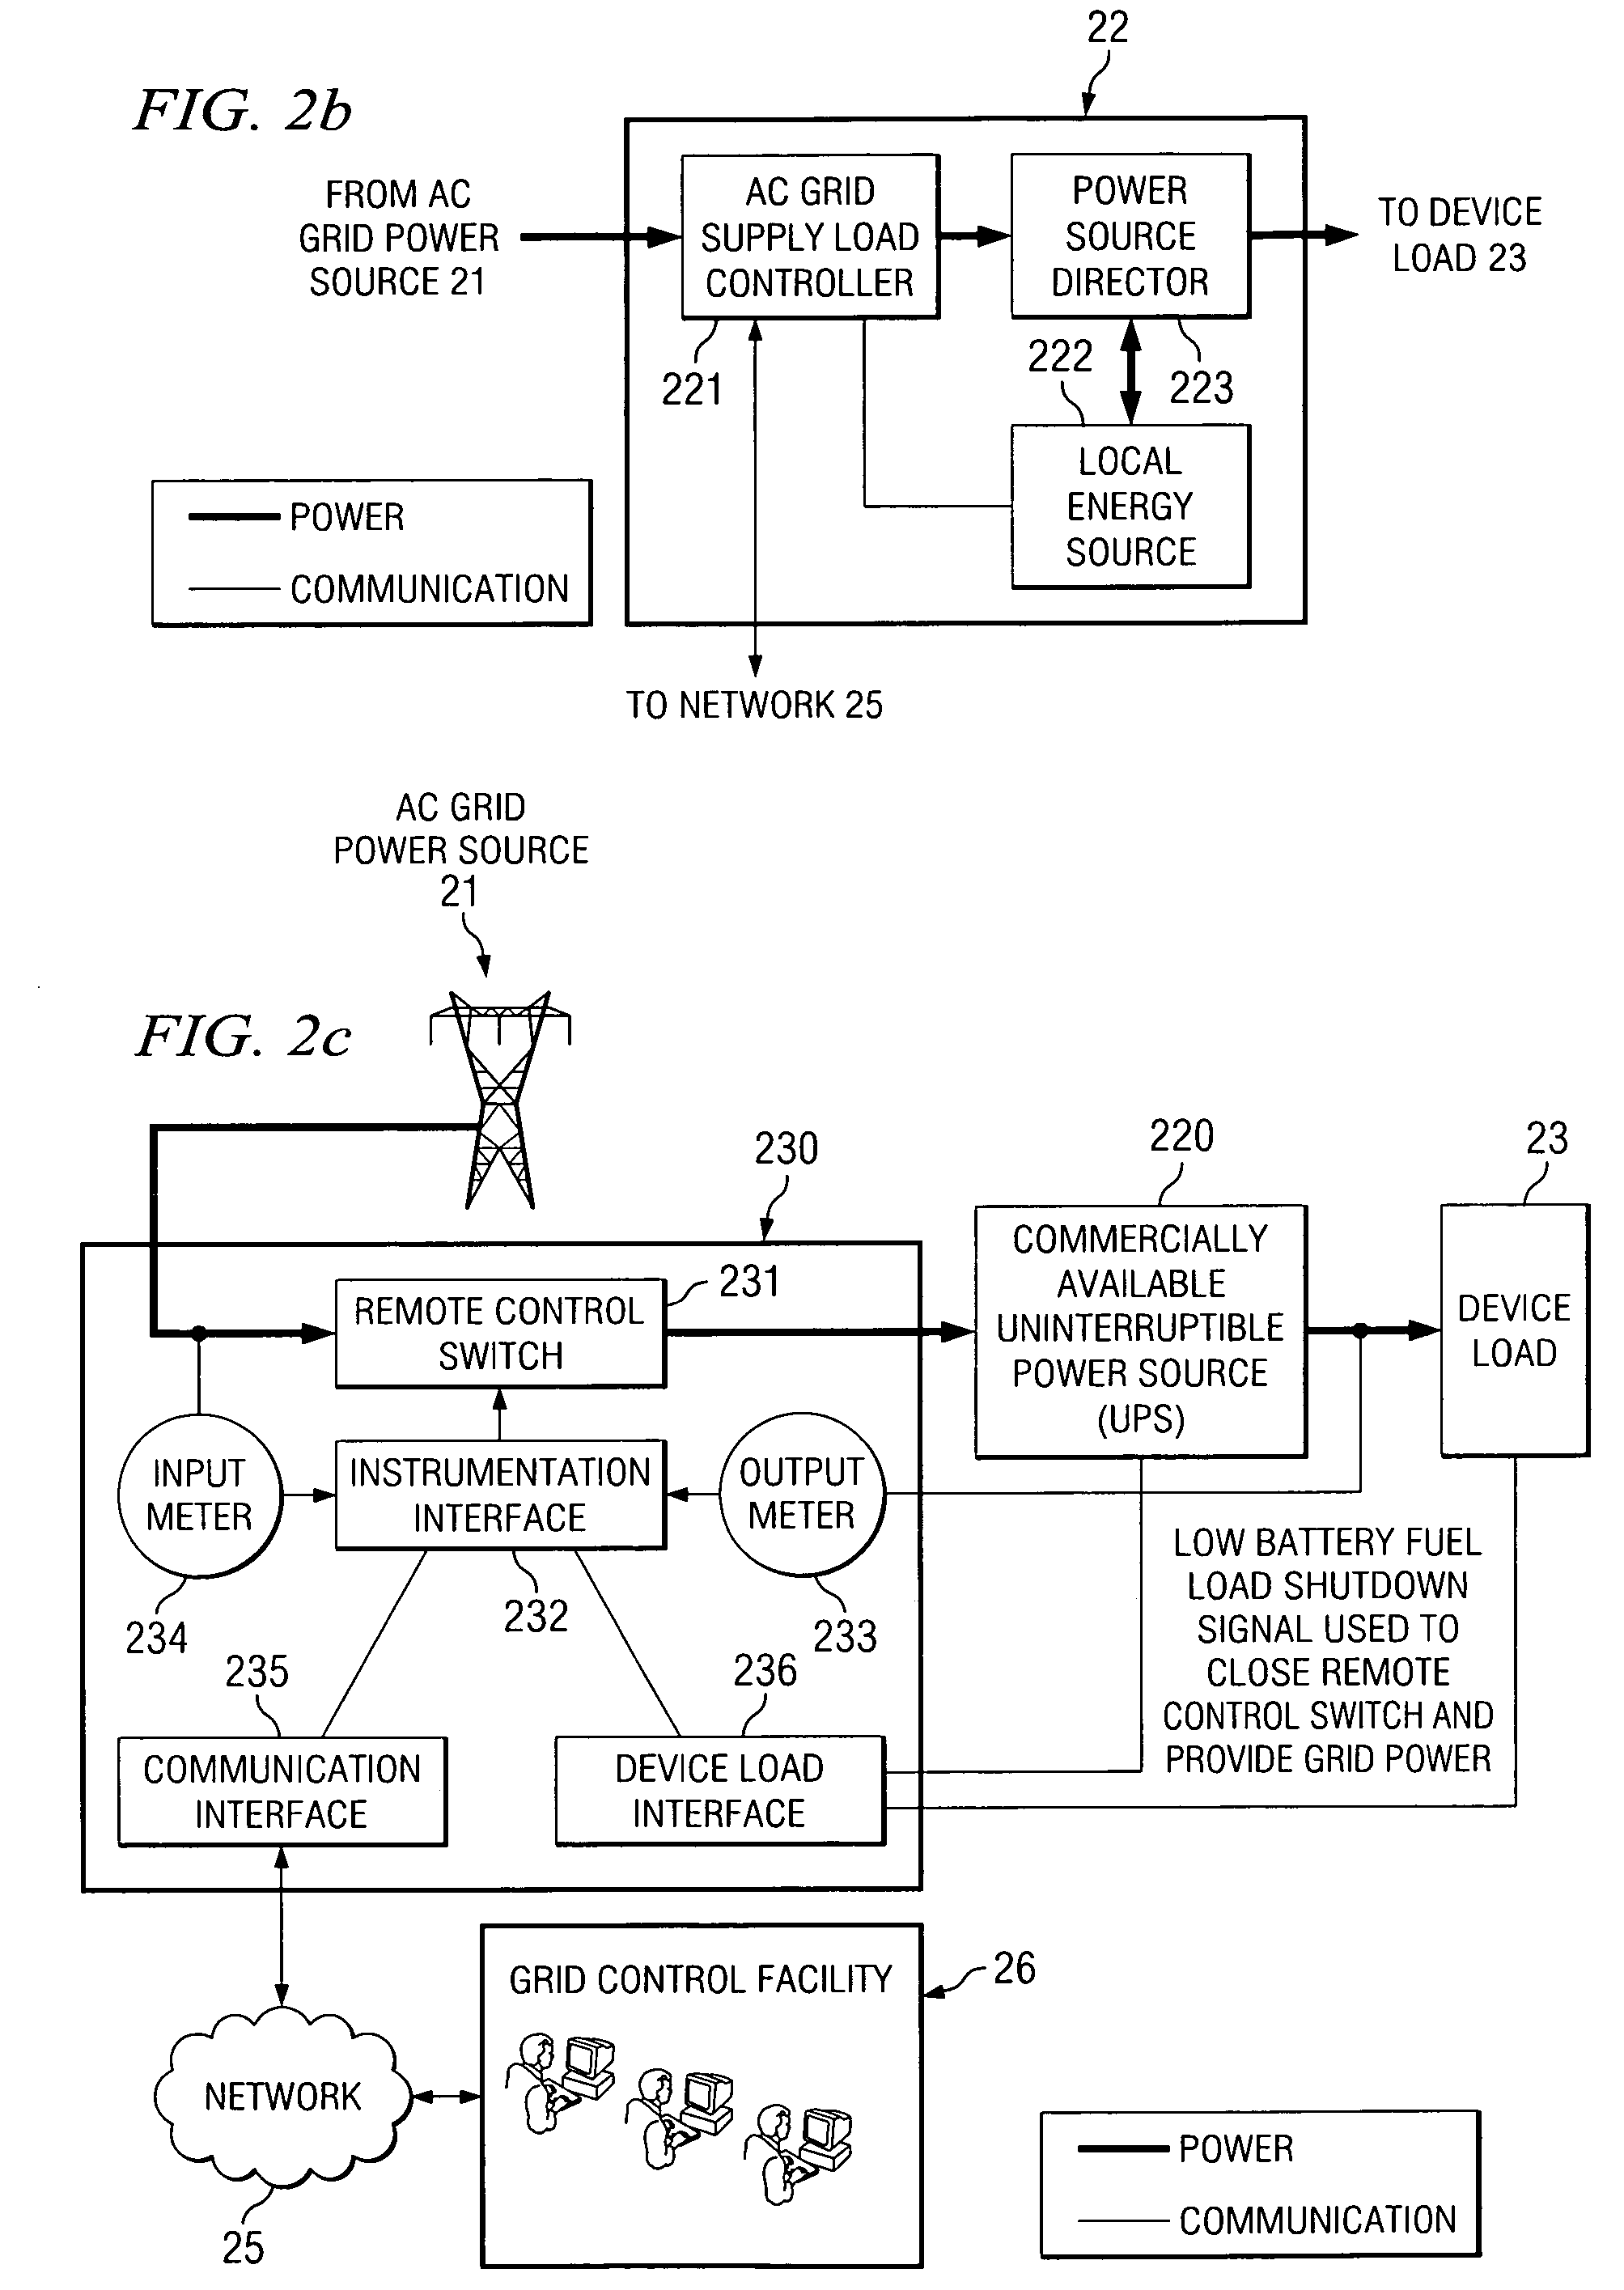 Fast acting distributed power system for transmission and distribution system load using energy storage units